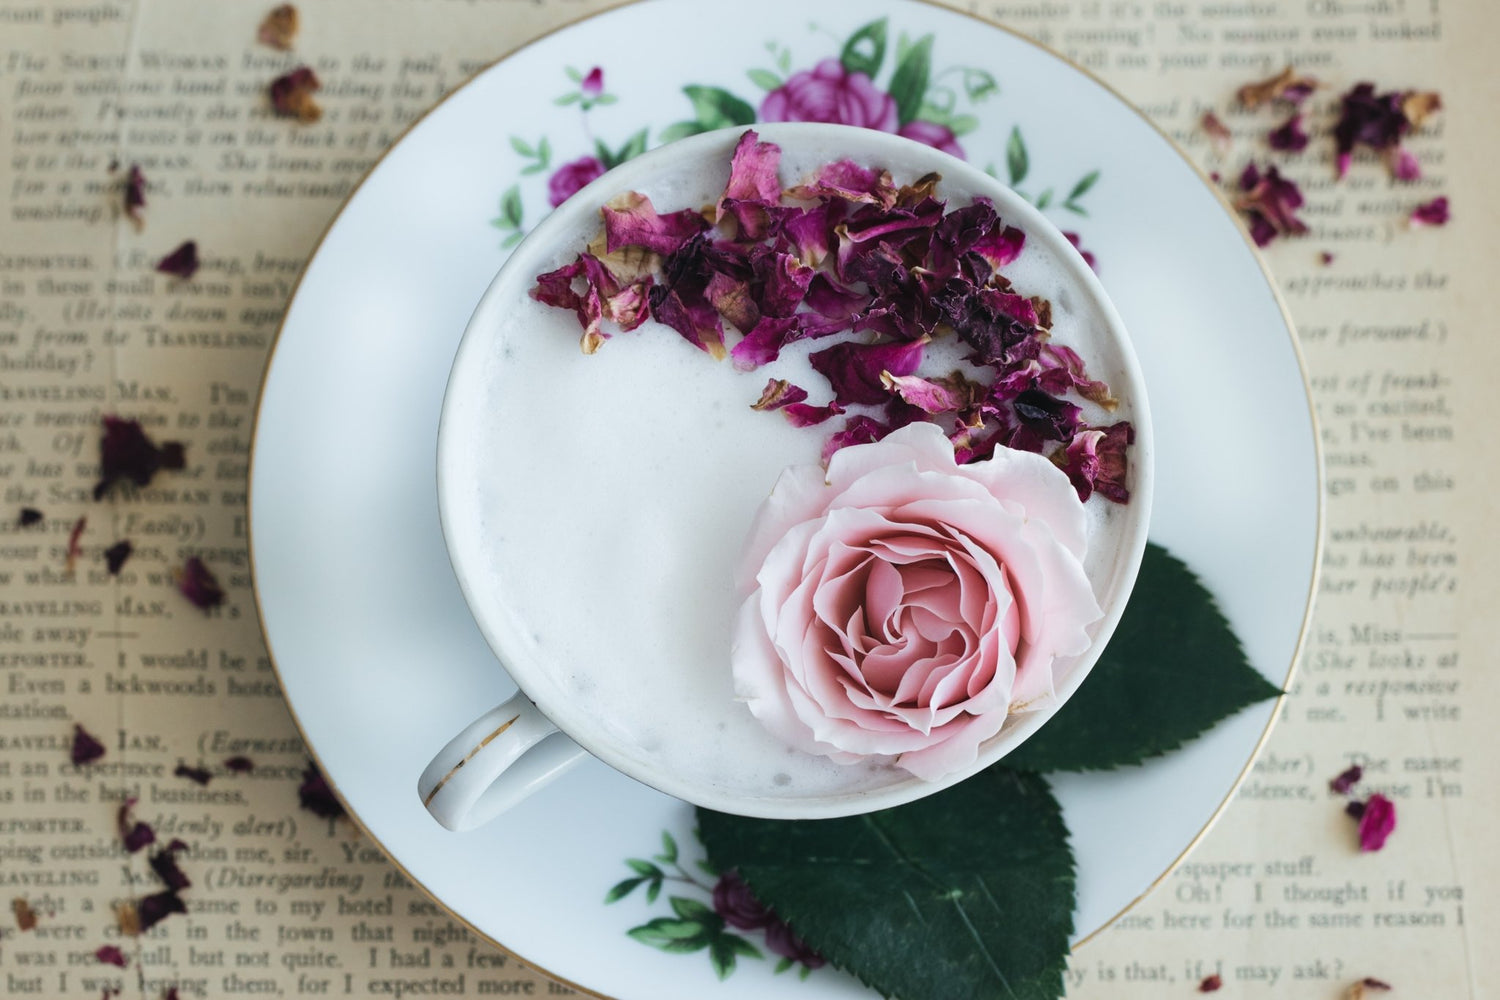 Soothe Your Tummy And Fight Inflammation With This Creamy Cardamom-Ginger-Rose Milk Tea Recipe - Loose Leaf Tea Market